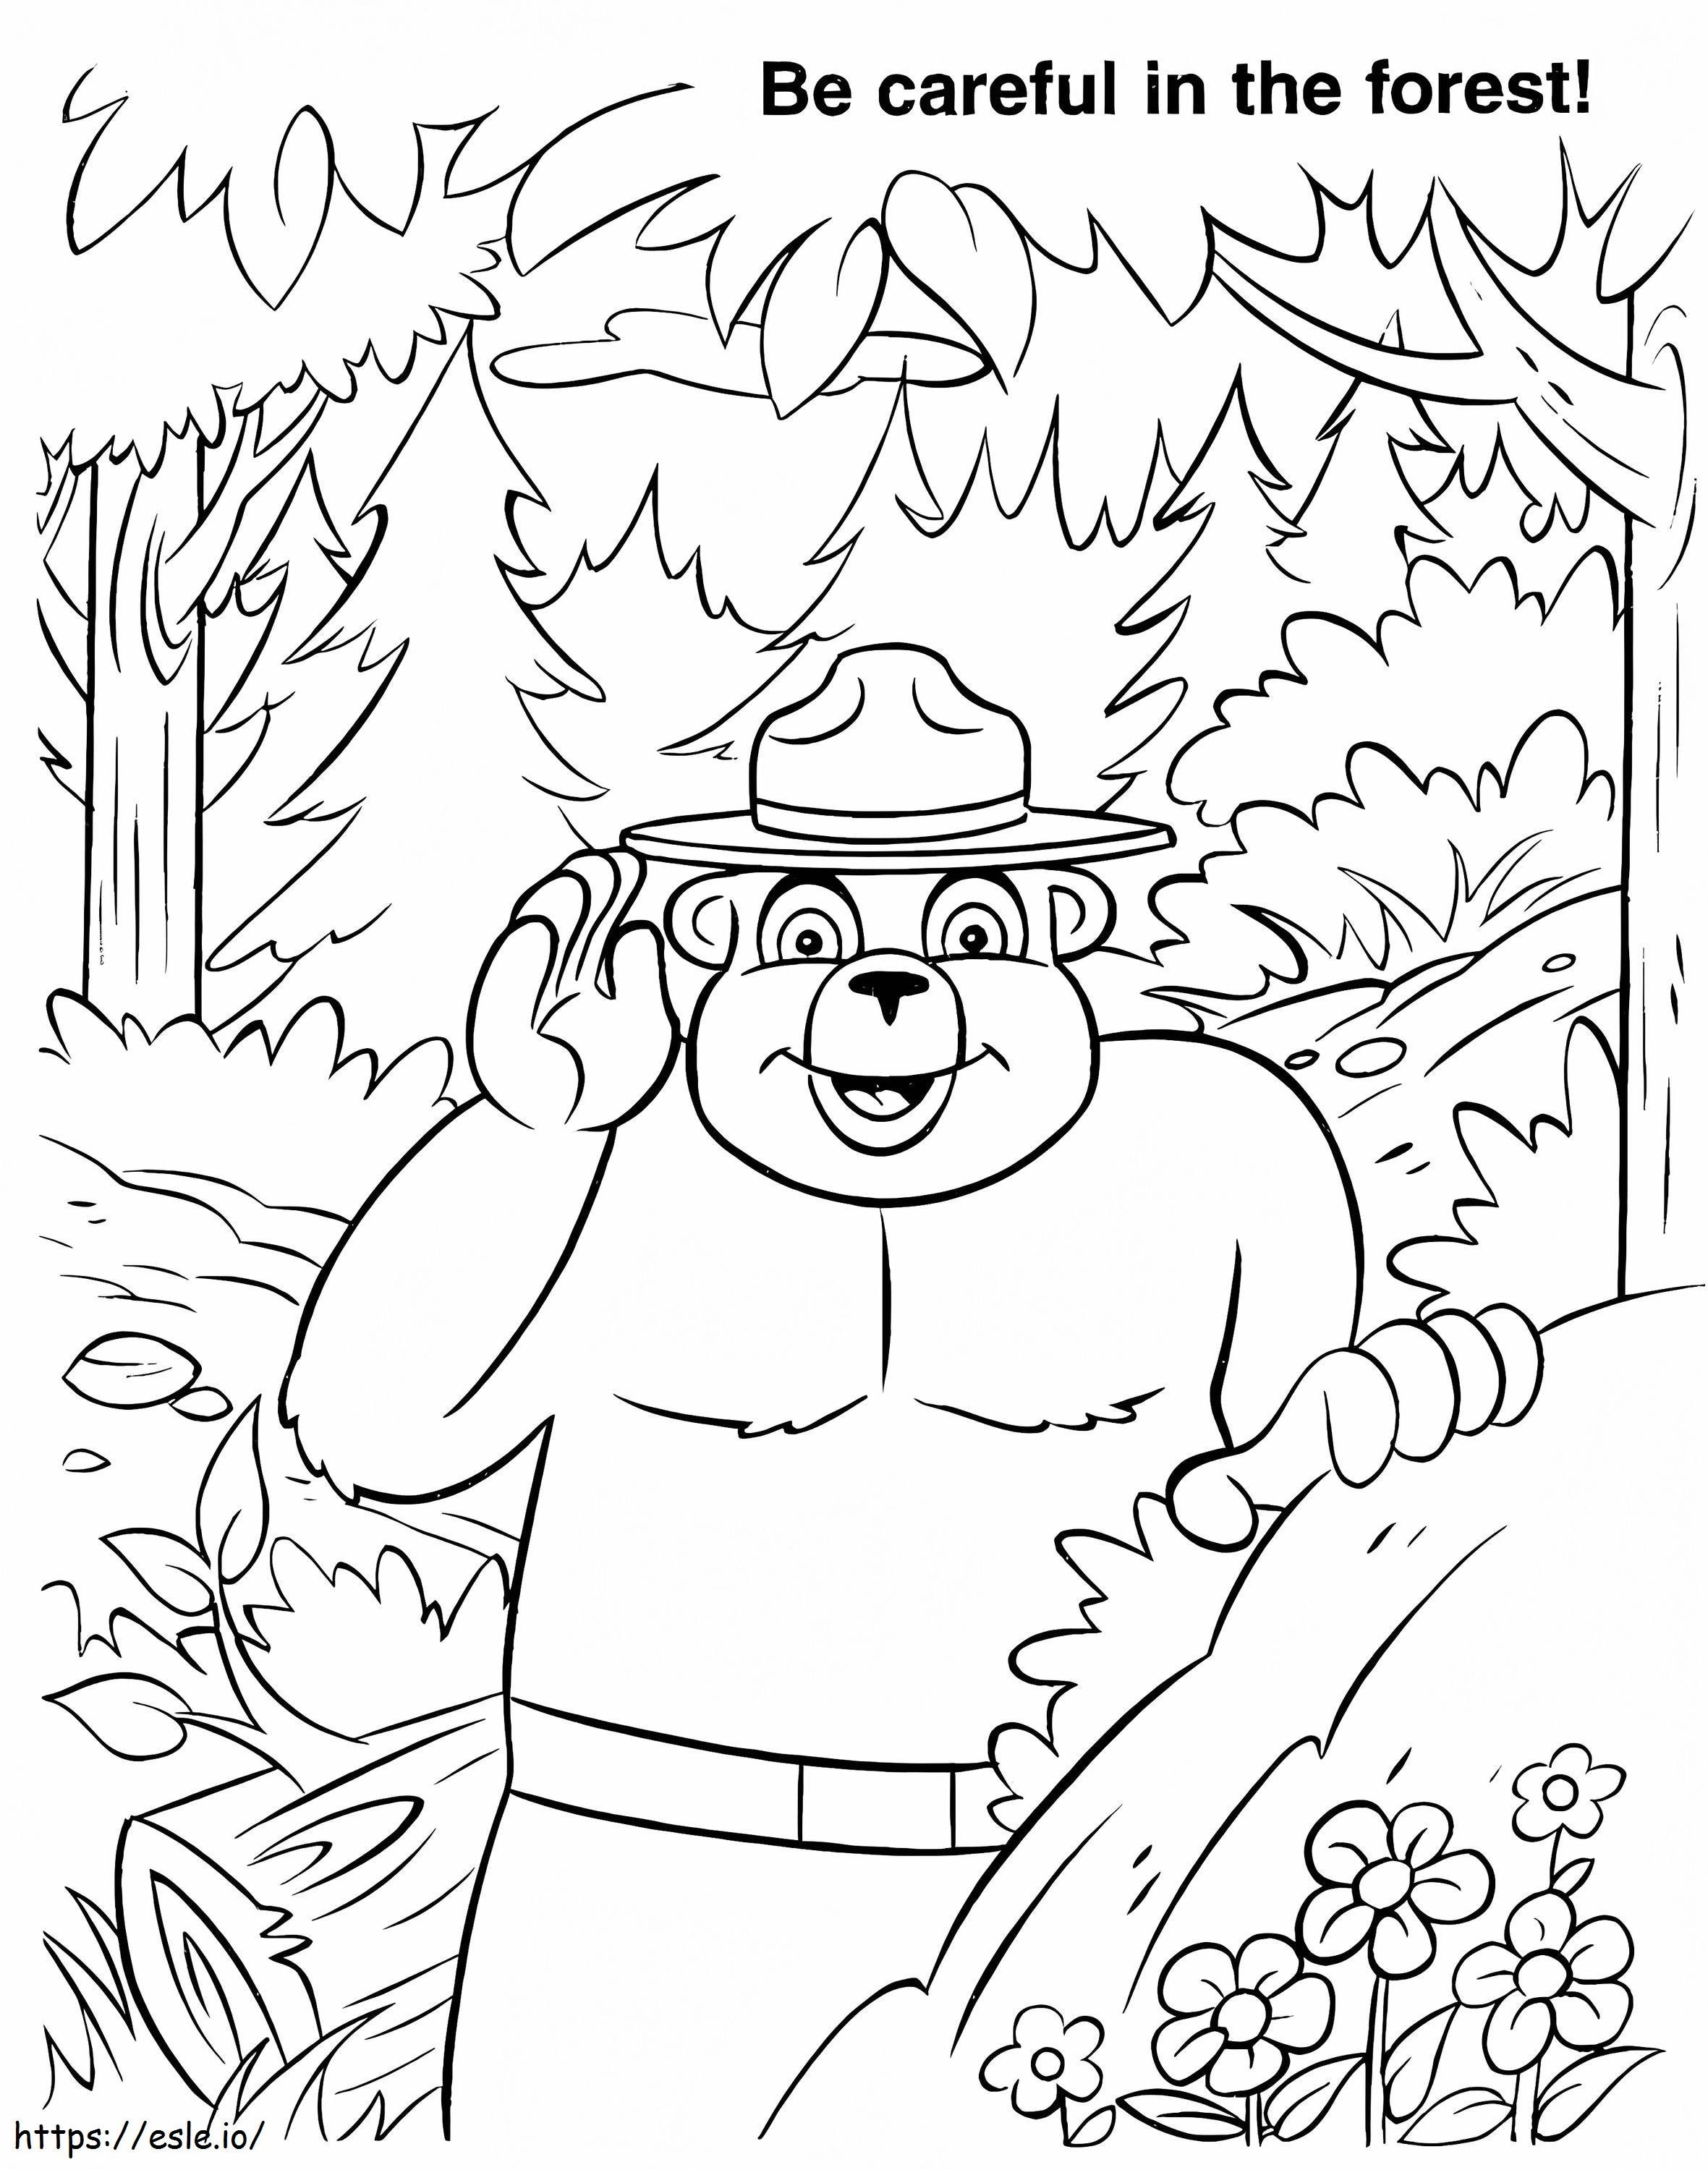 Smokey Bear In The Forest coloring page